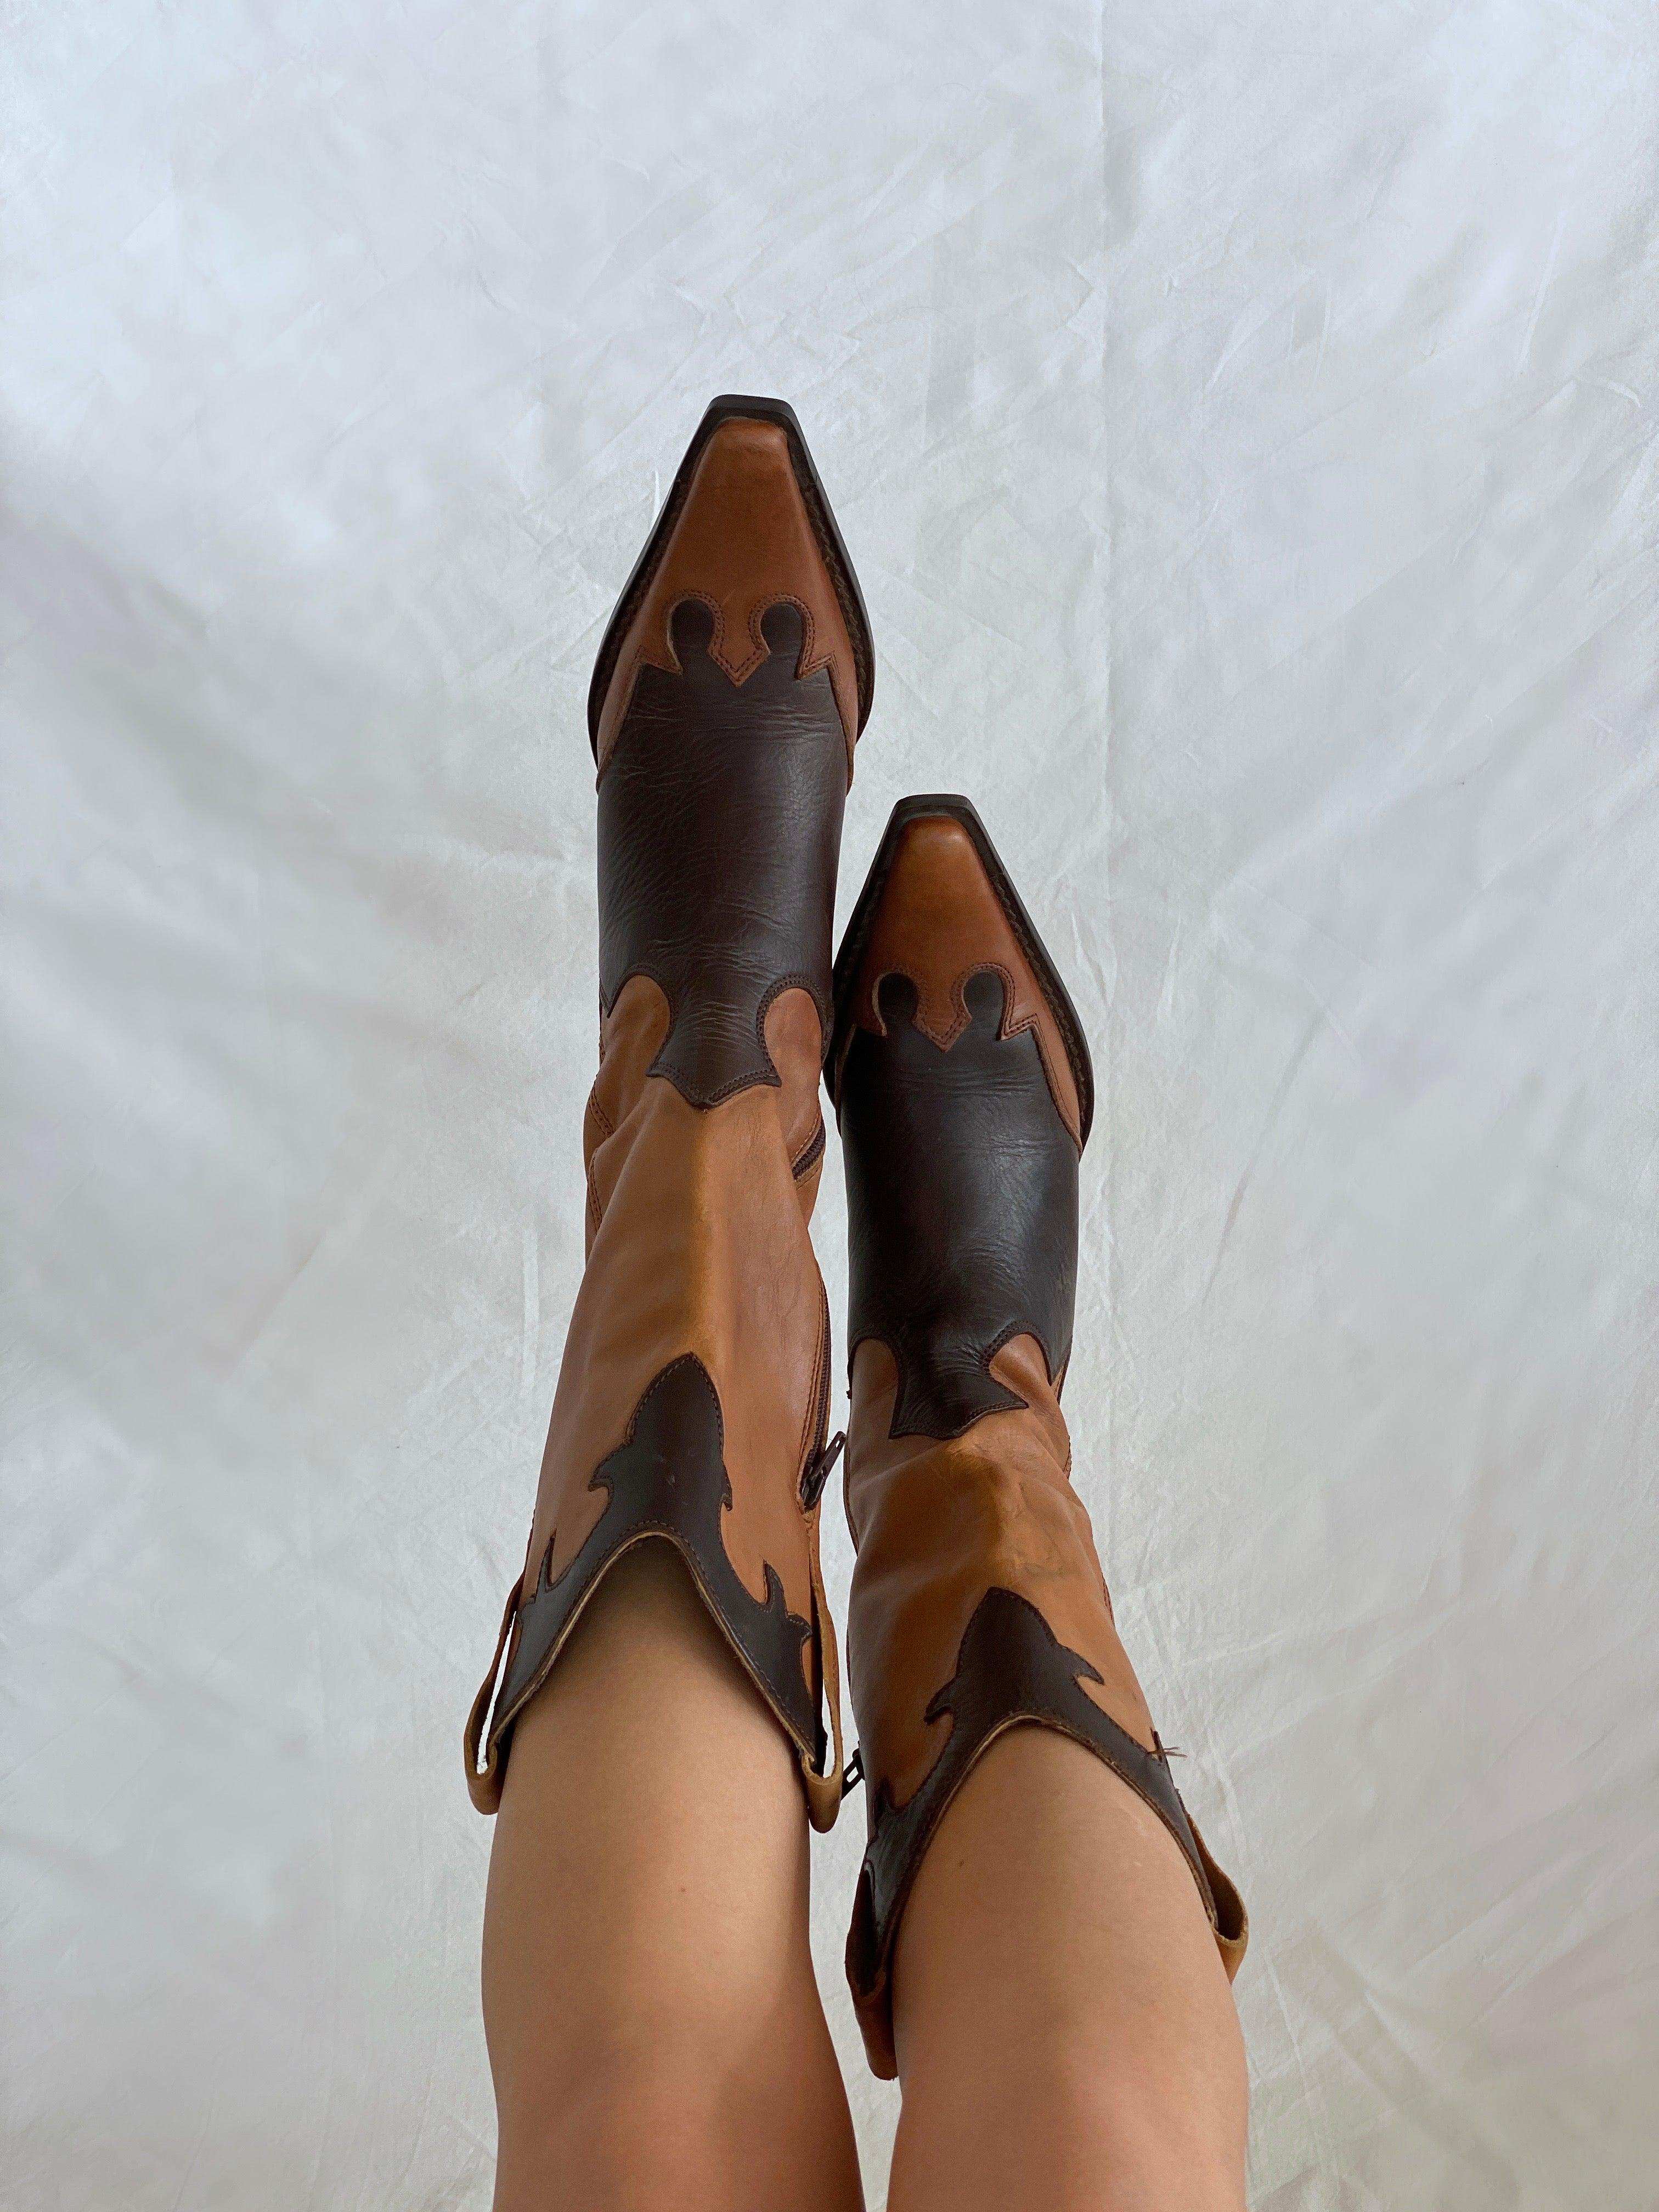 Rare Vintage 90s/00s Genuine Leather Mustang Shoes Cowboy Boots - Balagan Vintage Cowboy boots Boots, brown leather, cowboy boots, genuine leather, NEW IN